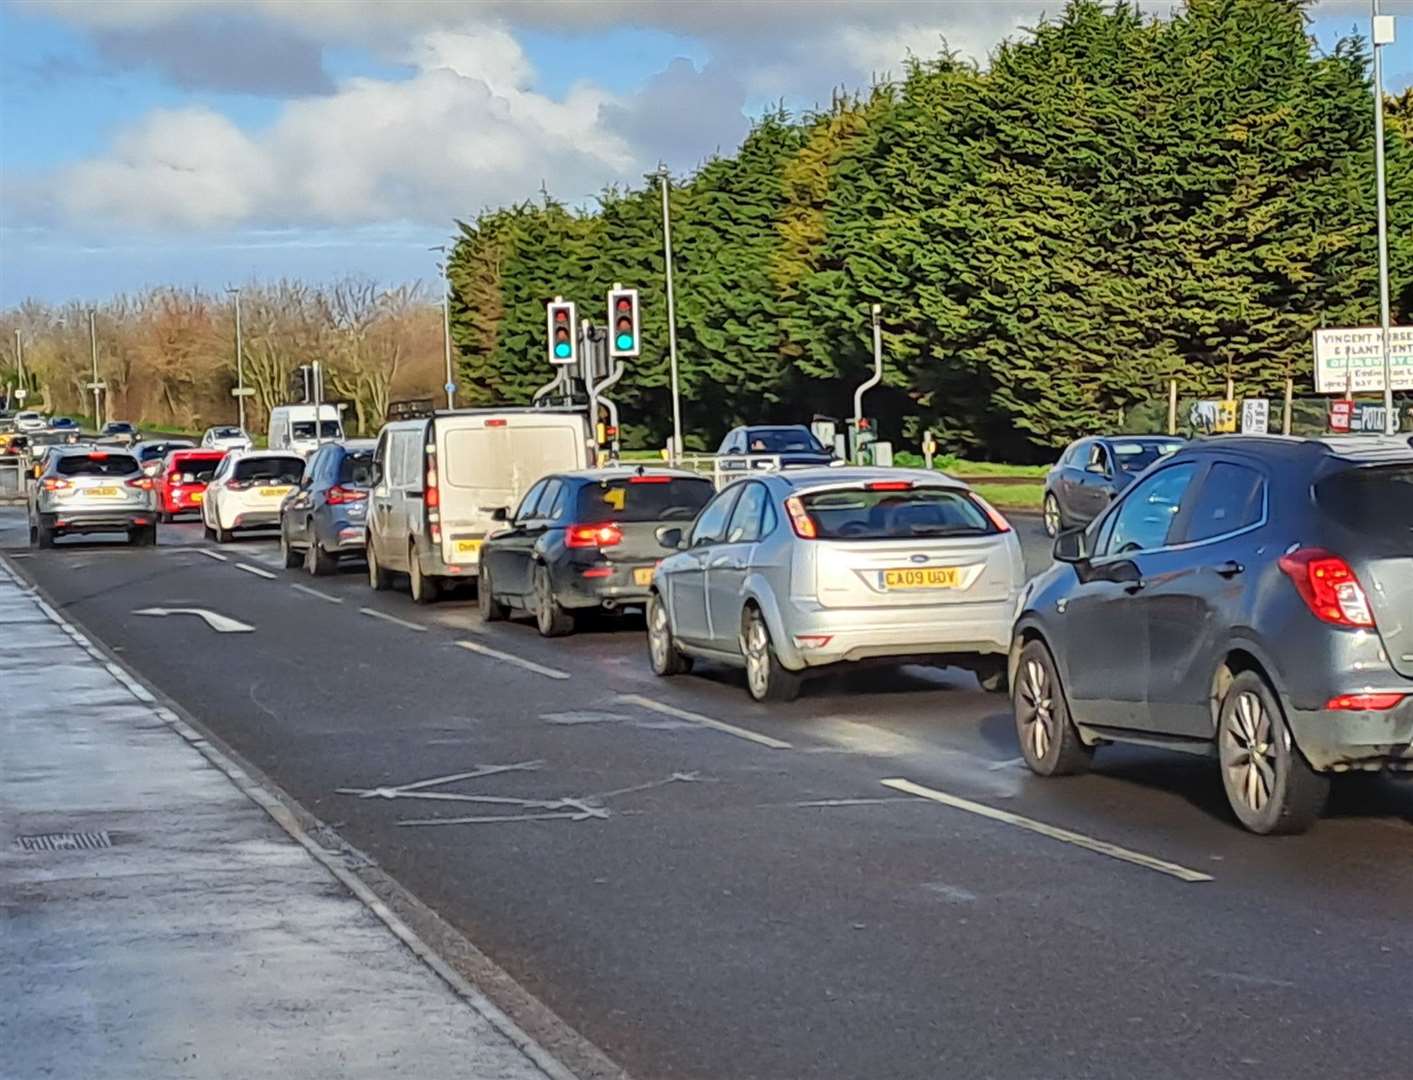 The Old Thanet Way was gridlocked on Monday morning as vehicles came off the A299